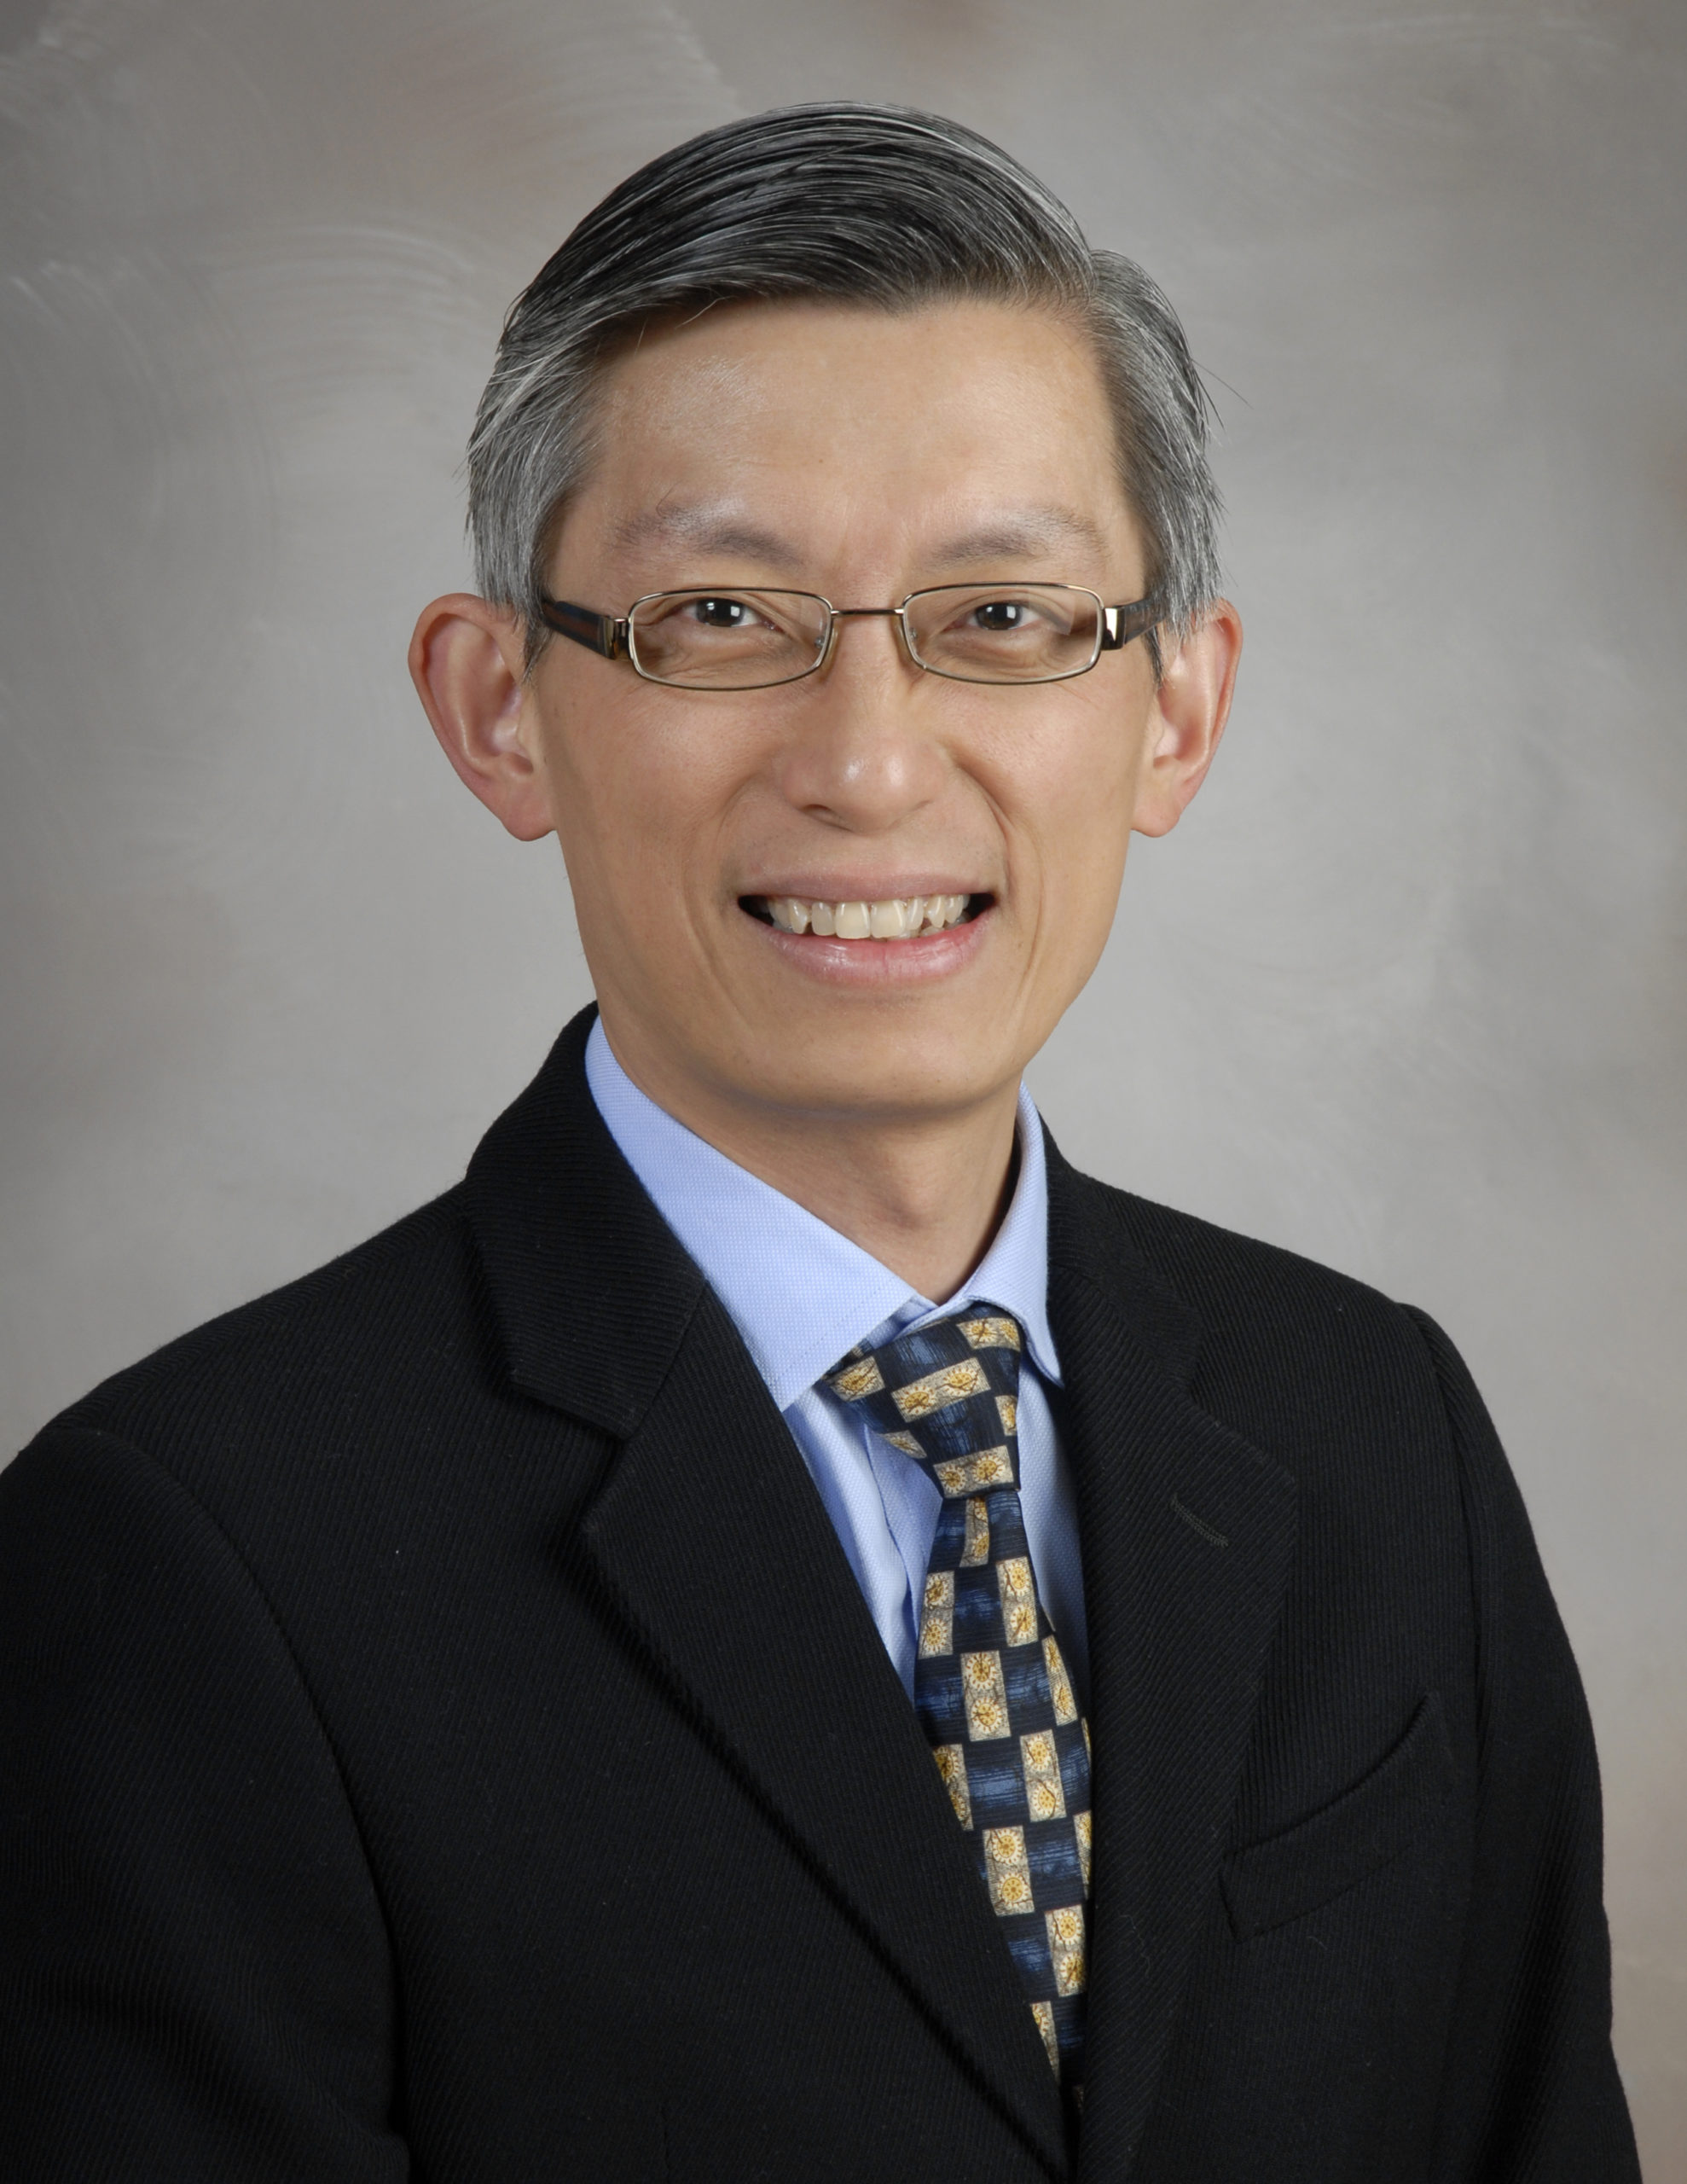 Patrick H. Kee Doctor in Houston, Texas